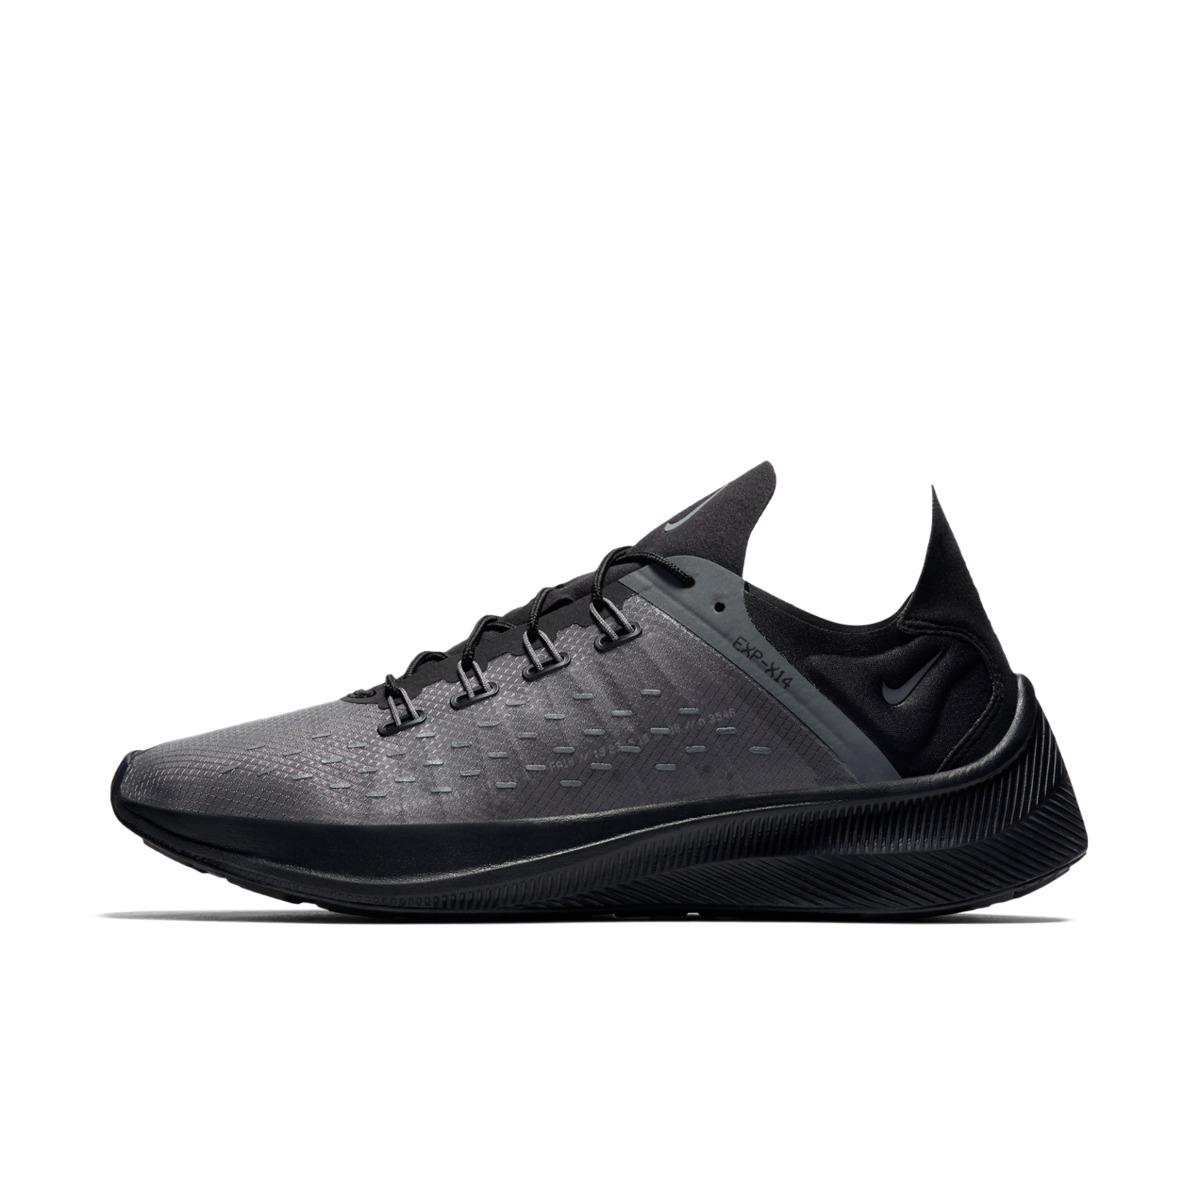 nike black and grey future fast racer trainers